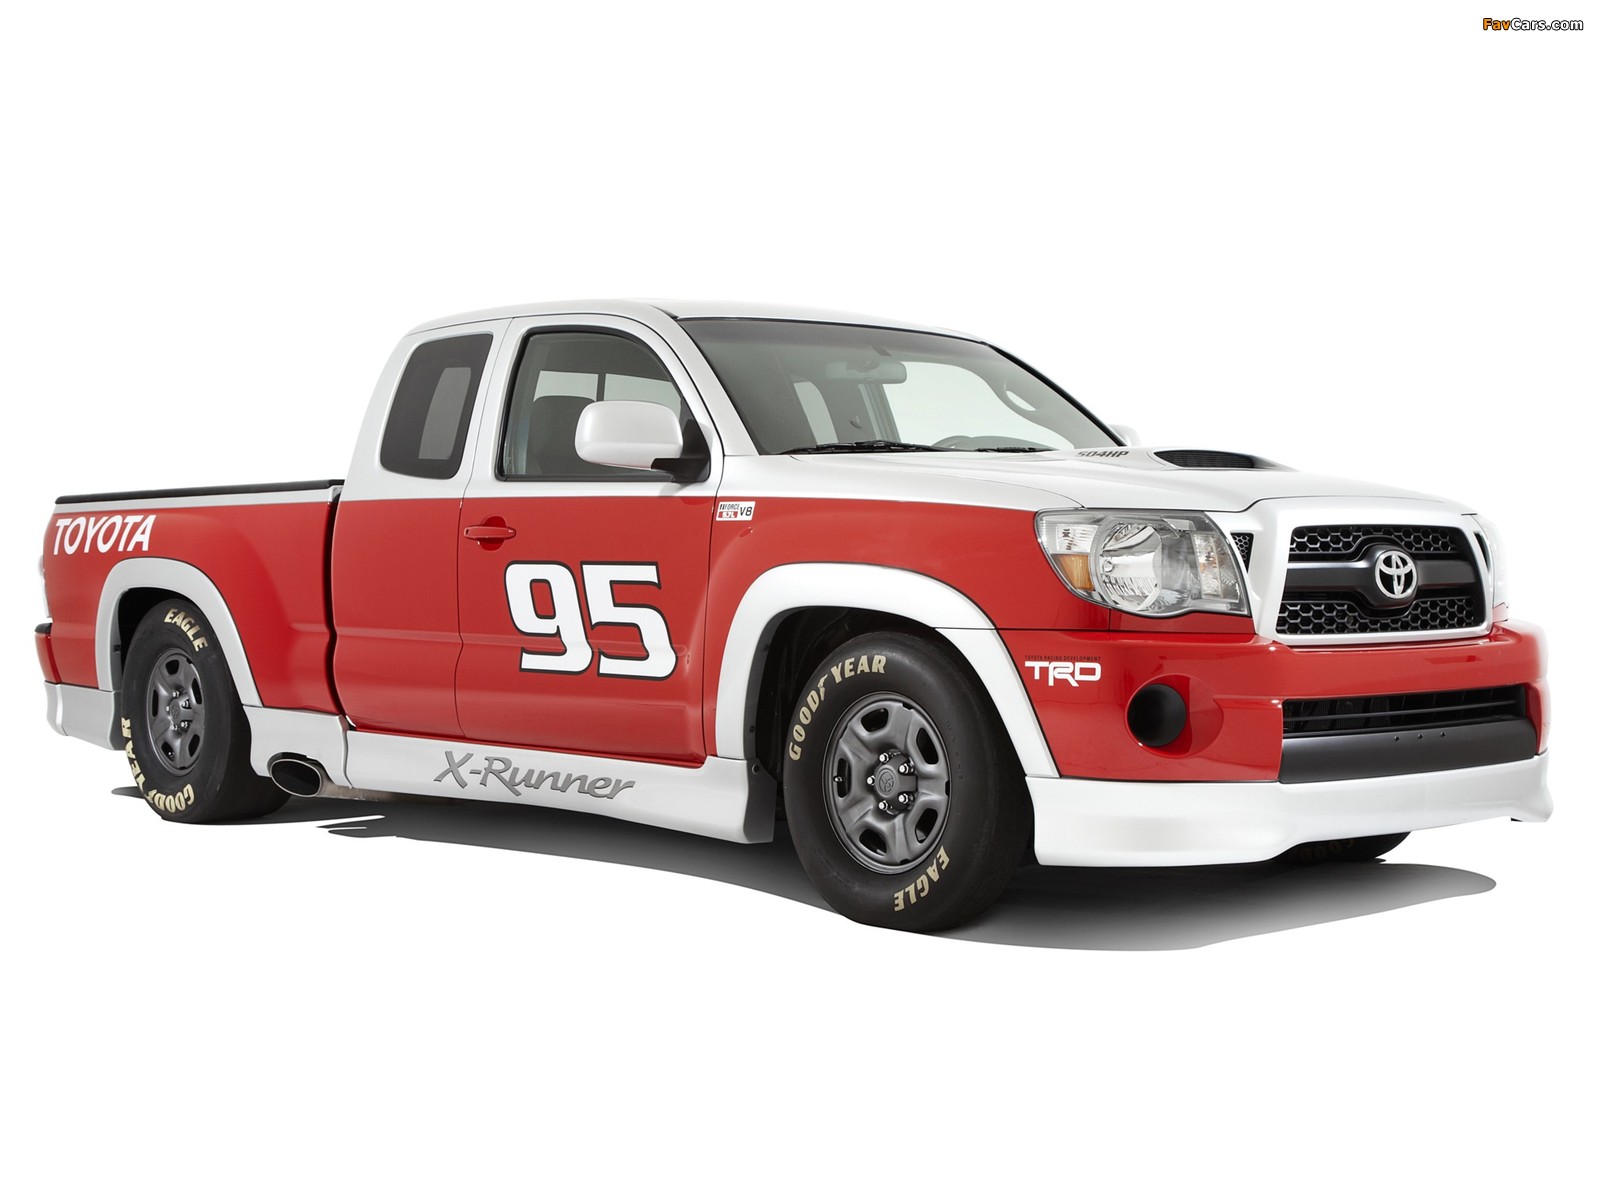 Toyota Tacoma X-Runner RTR Concept 2010 wallpapers (1600 x 1200)